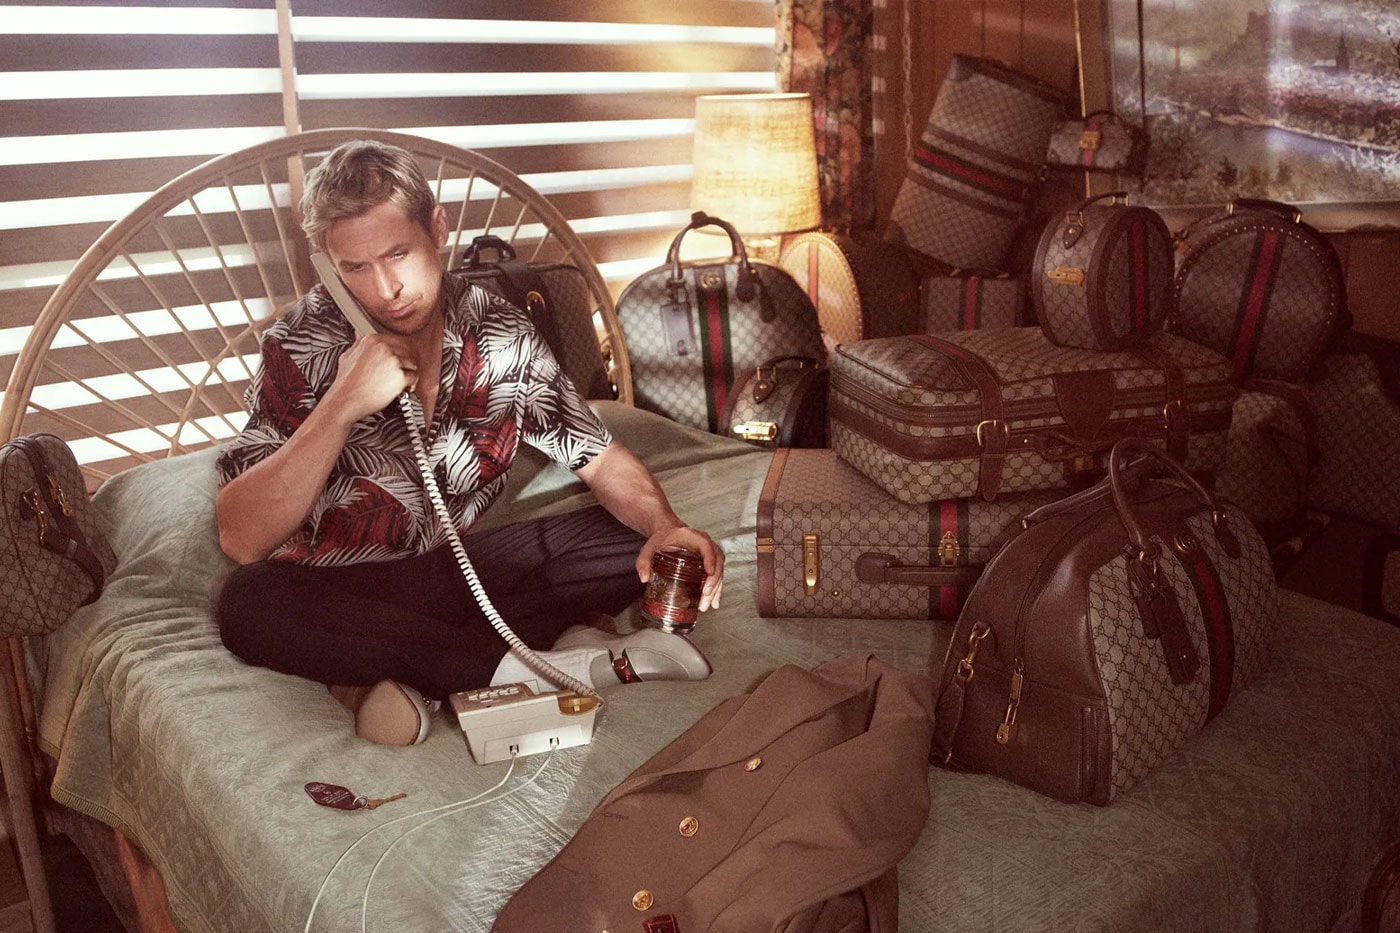 Ryan Gosling Is Gucci's Latest Muse Travel Luggage Campaign harry styles jared leto lana del rey Valigeria alessandro michele